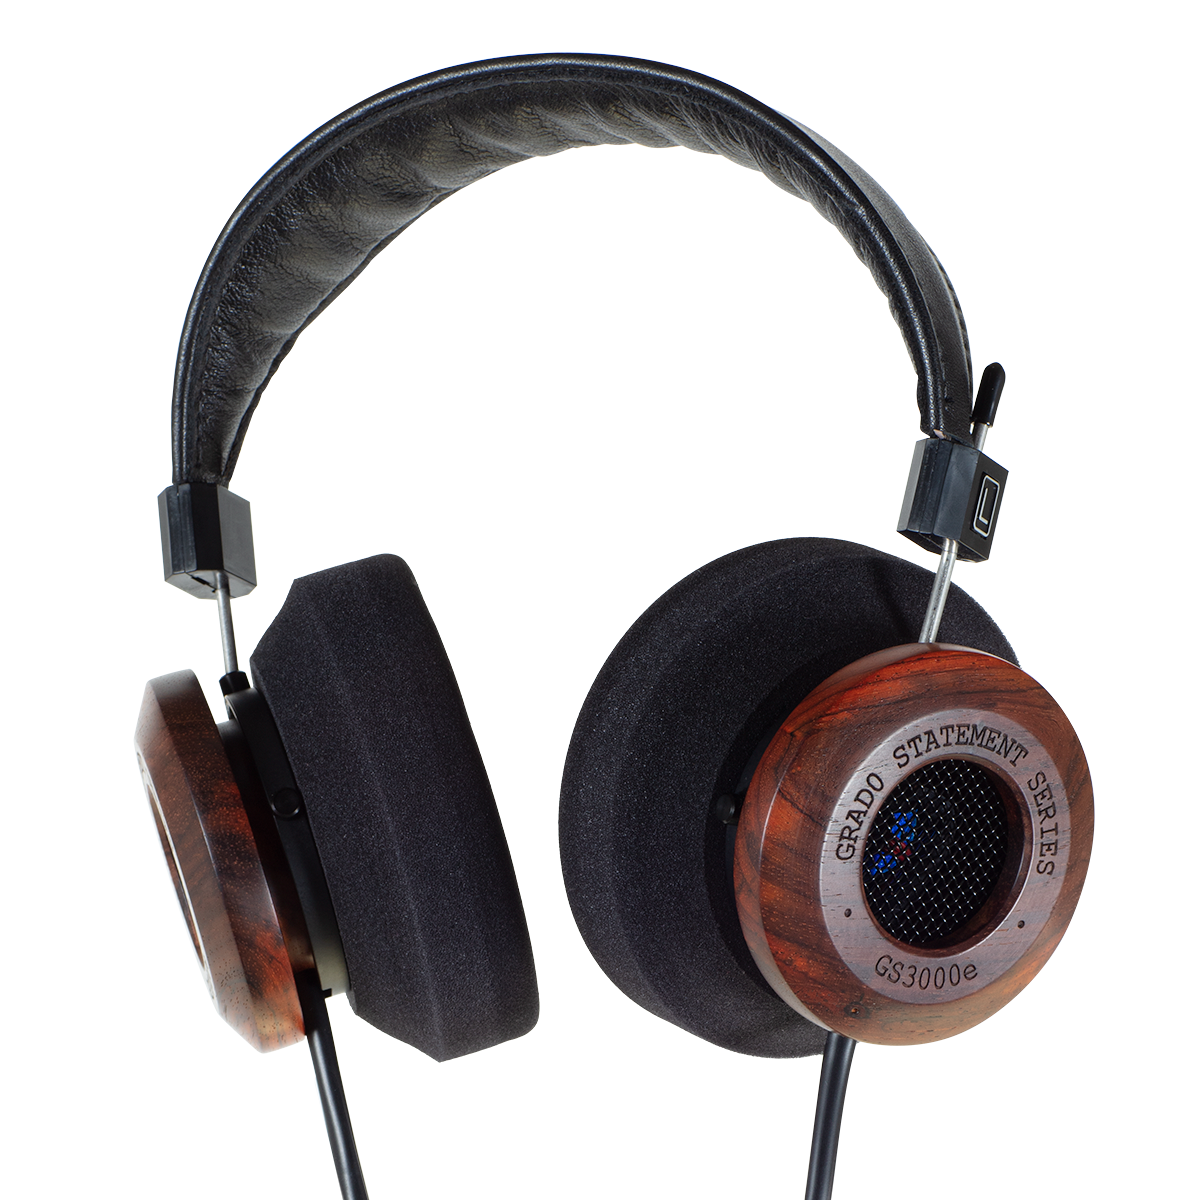 Photo of gs3000e headphones taken from a 3/4 view on a white background